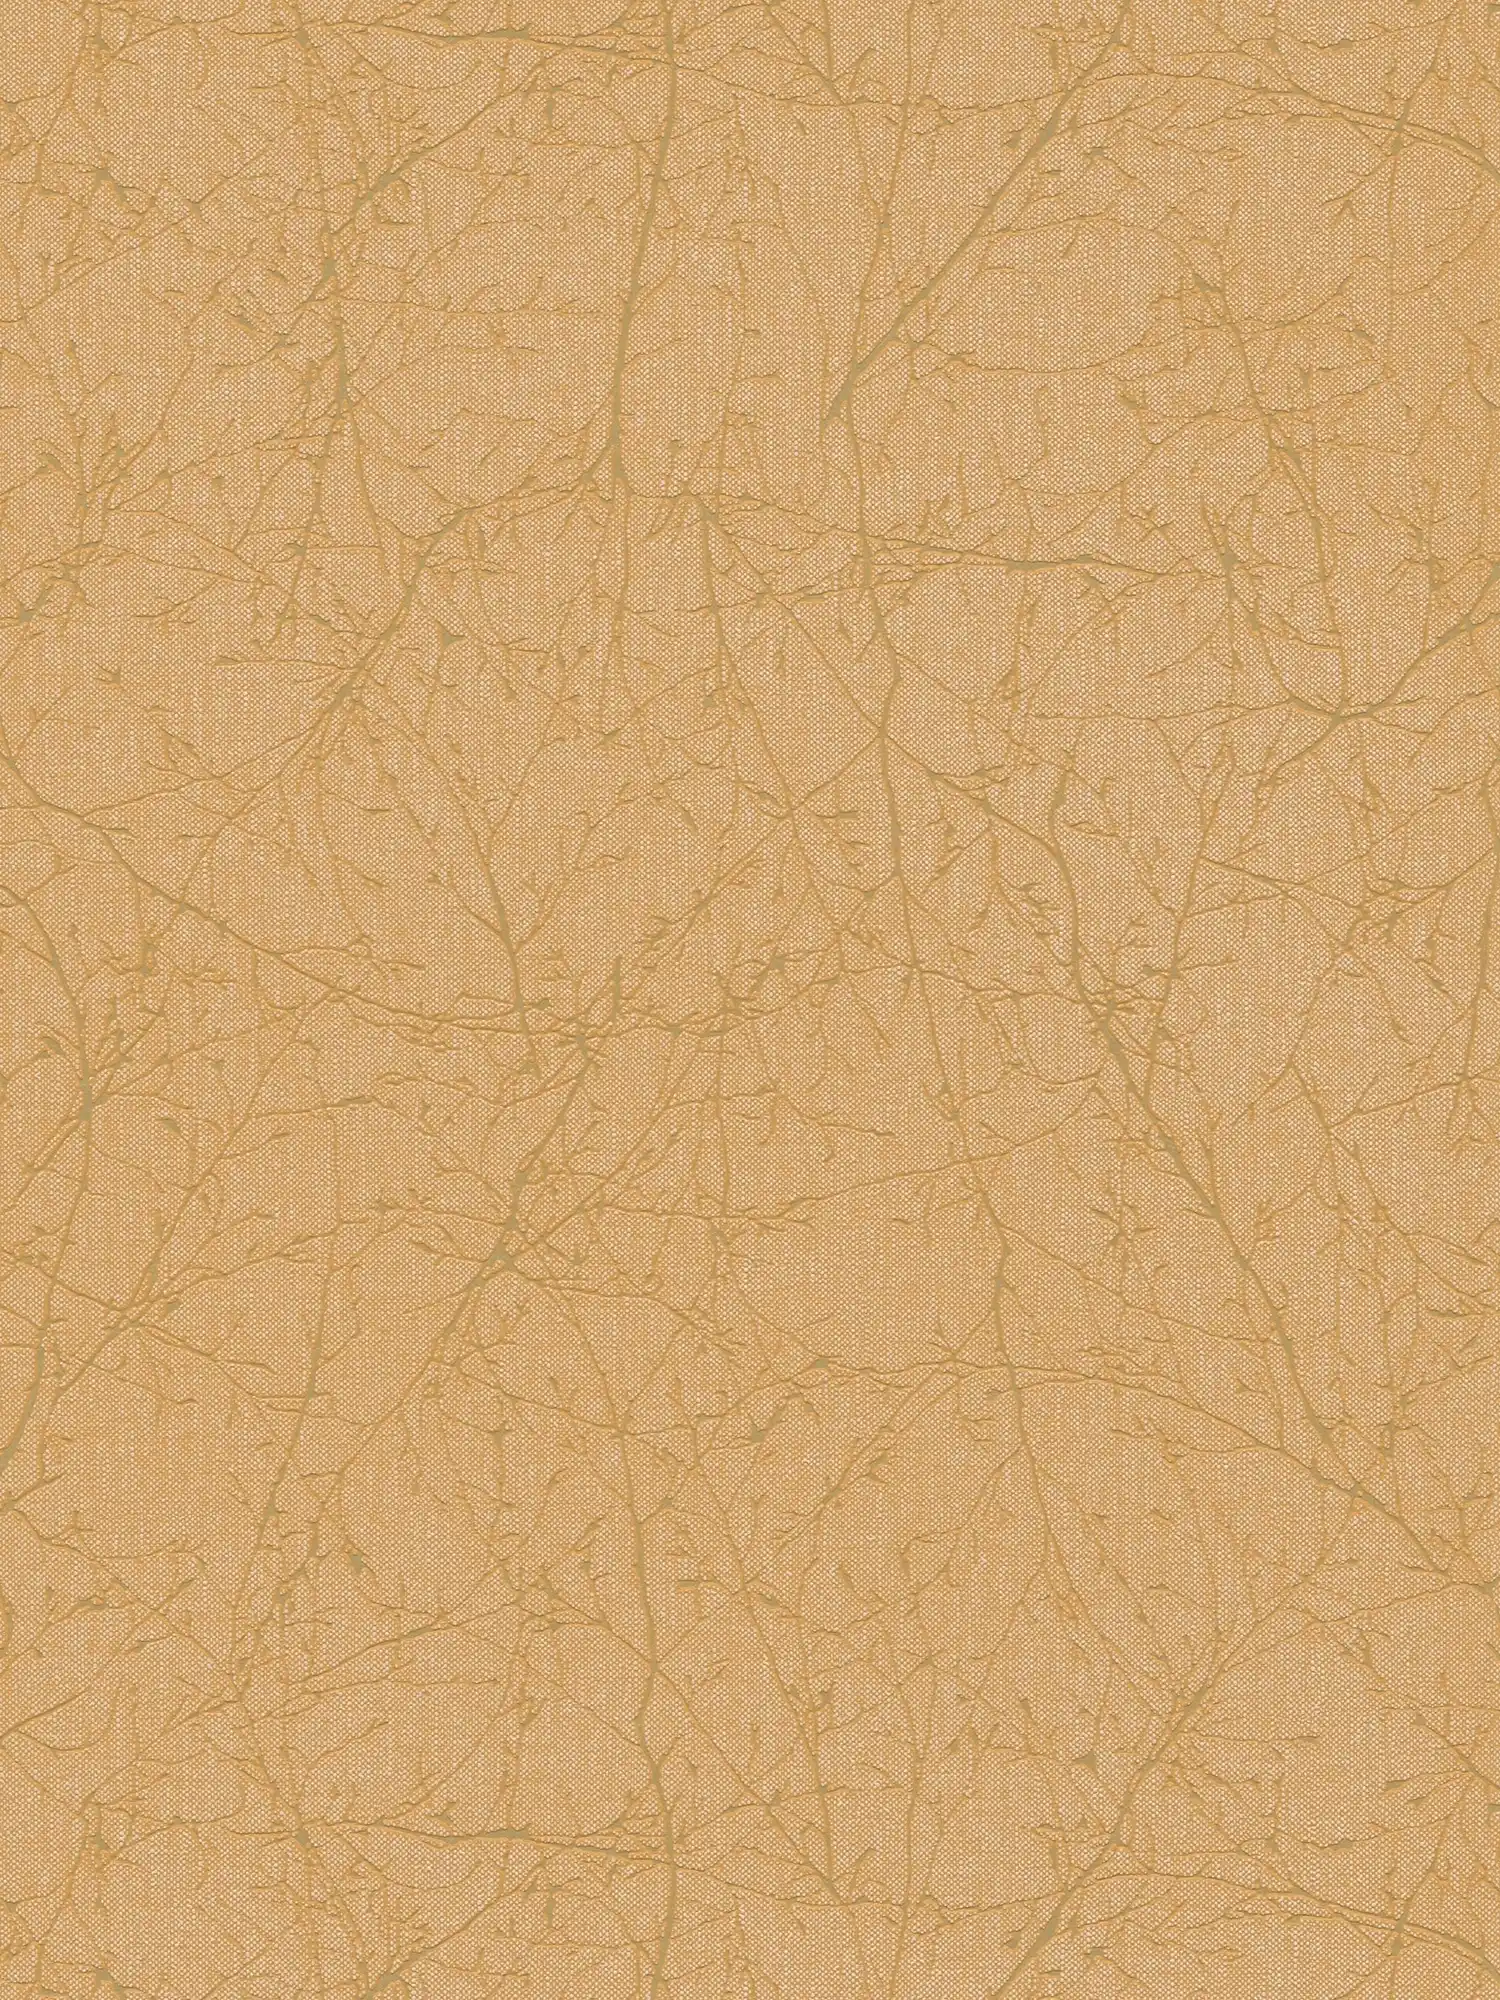 Non-woven wallpaper with branch pattern and light structure - gold, yellow
